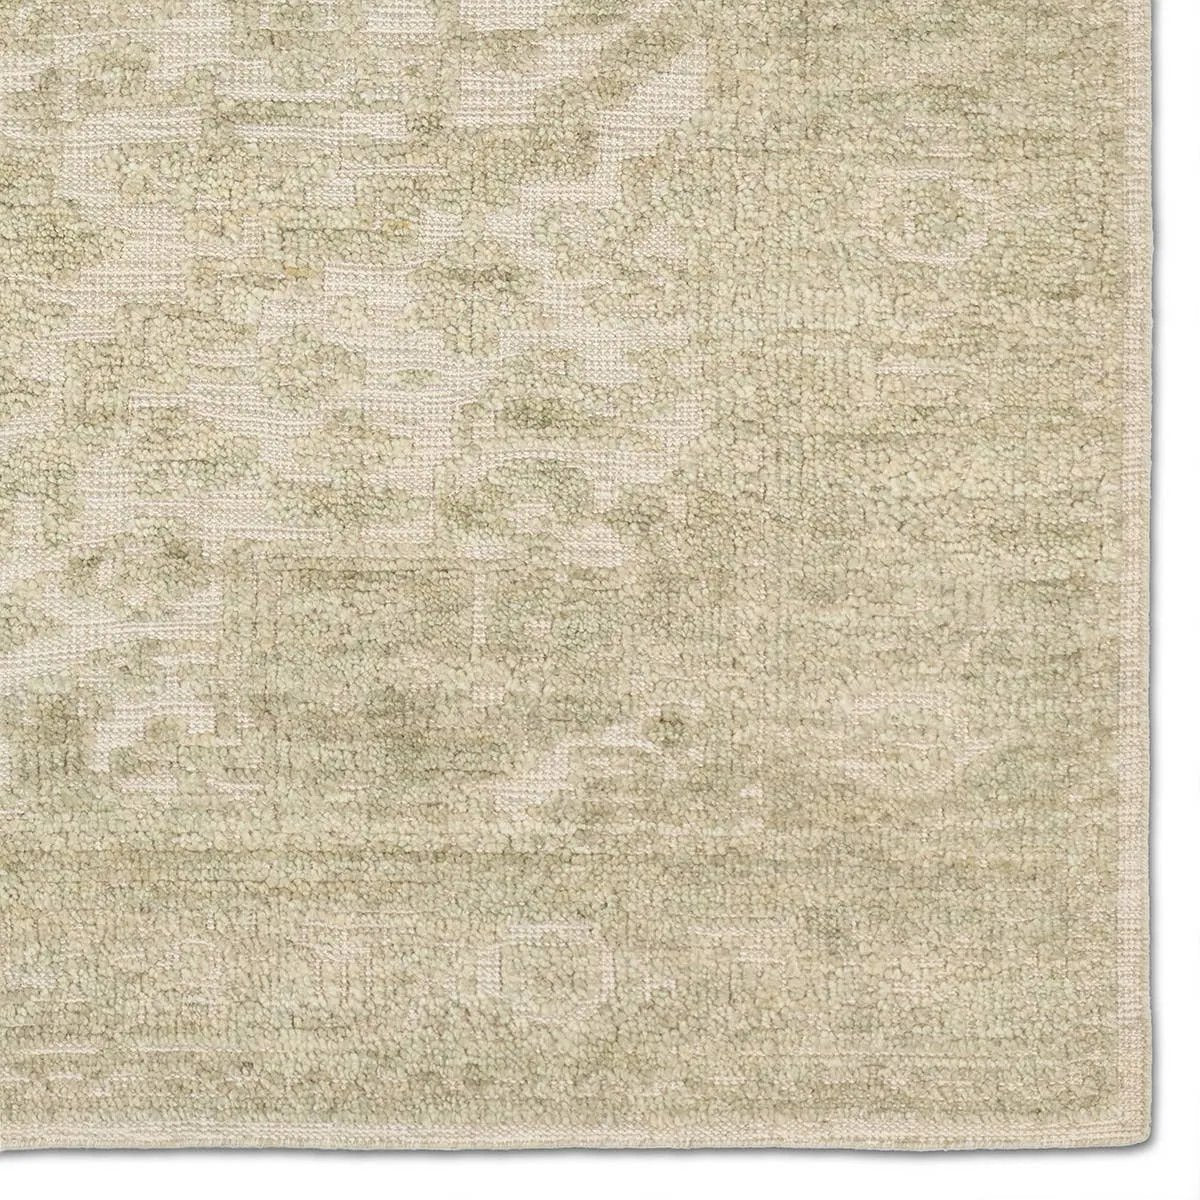 An extraordinary modern-day classic, the Pranhita rug’s sculptural hand-cut pile is plush, easy-to-care-for and stain resistant, but it is the impressive hand-knotted construction that sets it apart. Amethyst Home provides interior design, new home construction design consulting, vintage area rugs, and lighting in the Kansas City metro area.